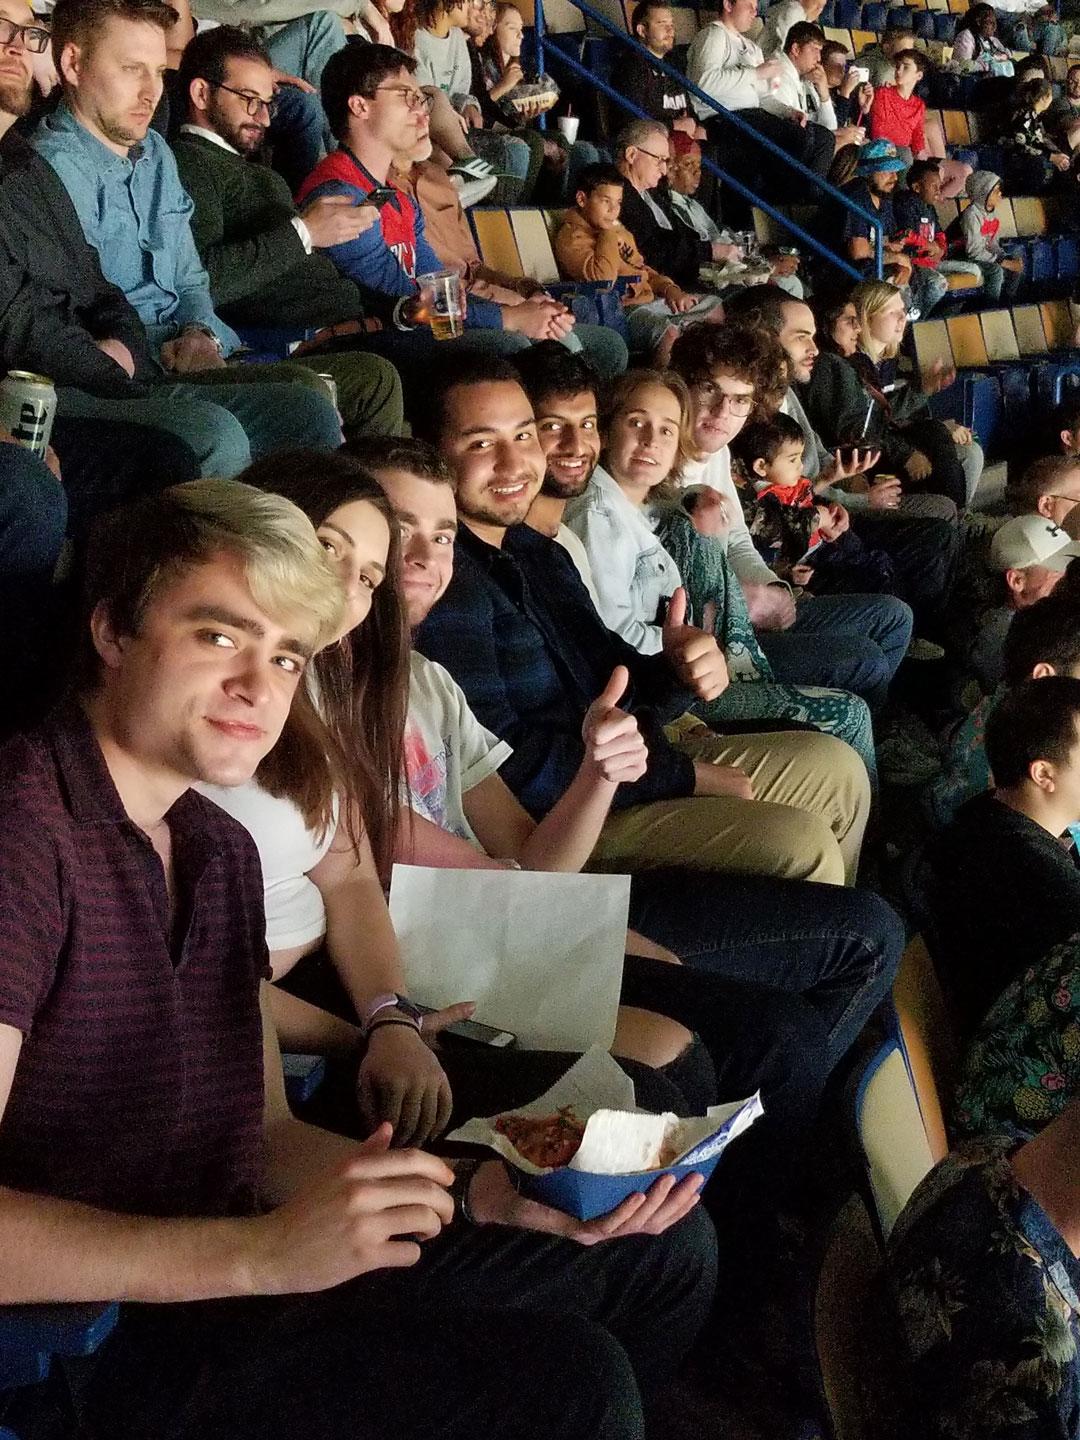 TRC members sitting in stands at a New Orleans Pelicans game